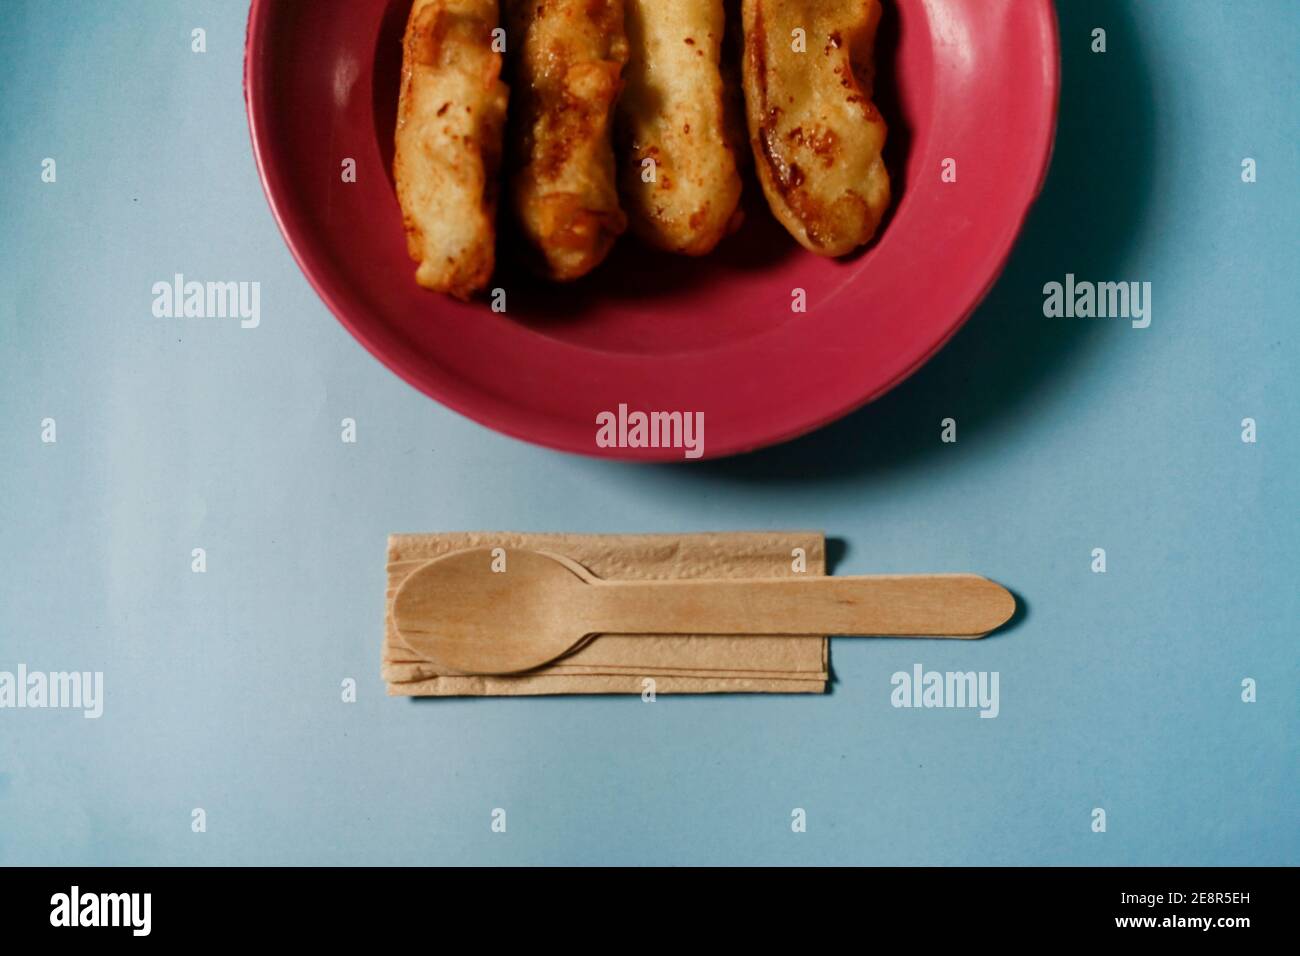 banana fried on red plate with wooden utensil isolated on blue background Stock Photo